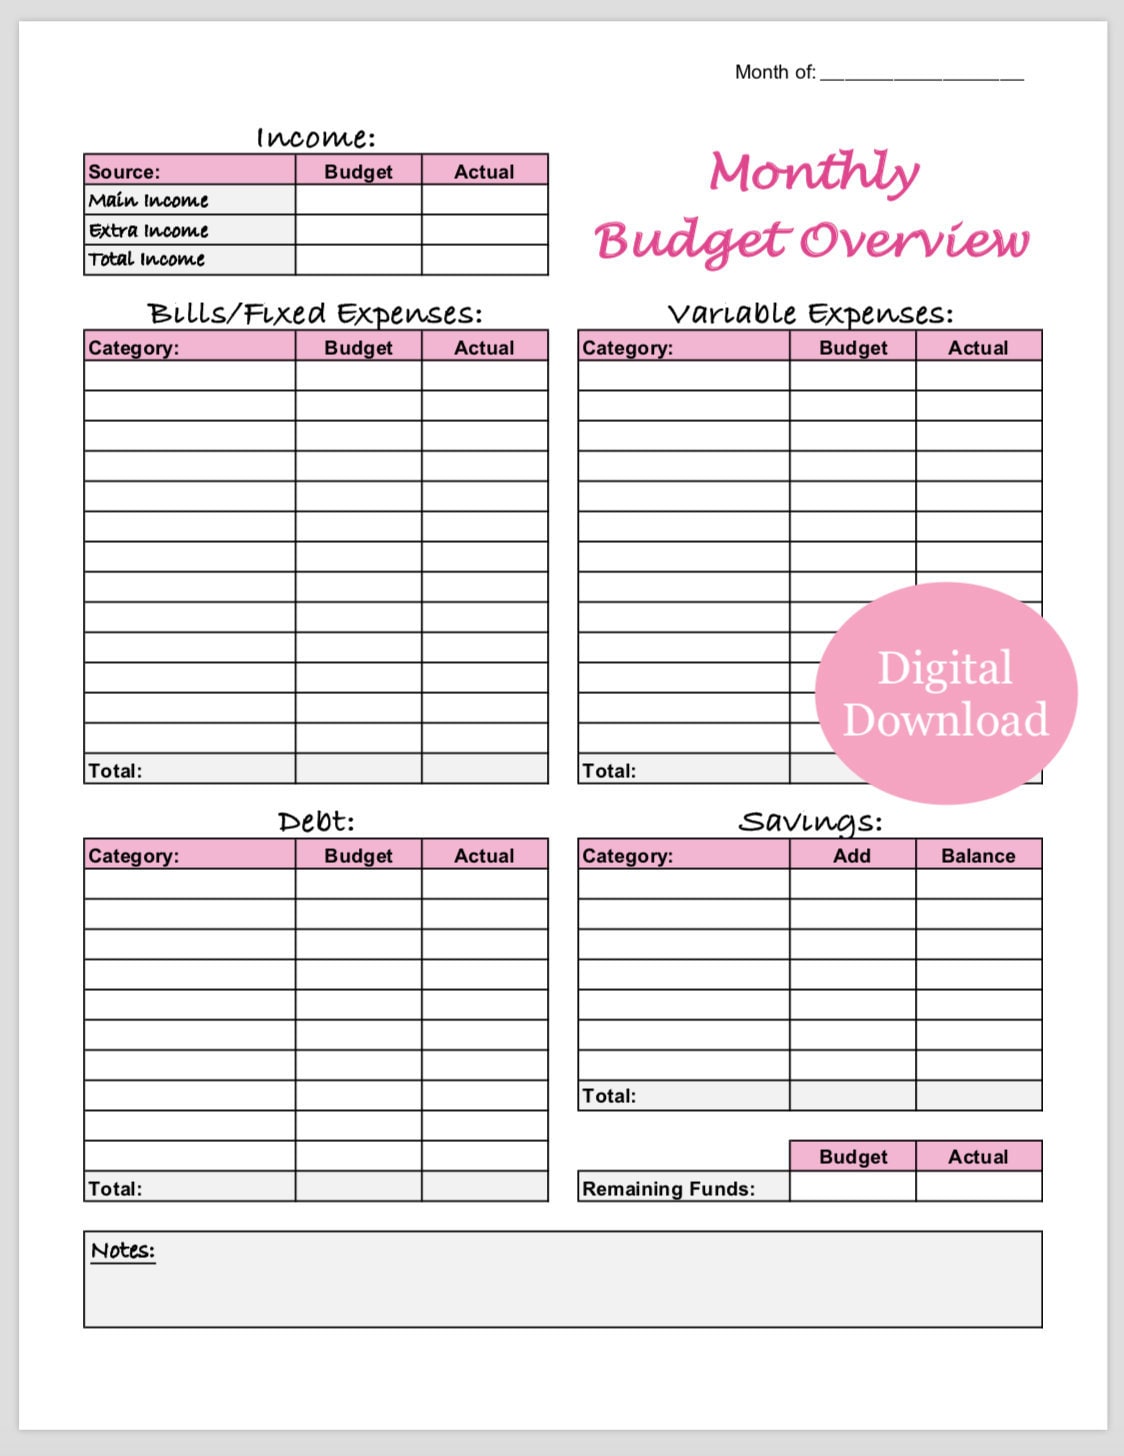 Monthly Budget Overview Template Printable pink Etsy